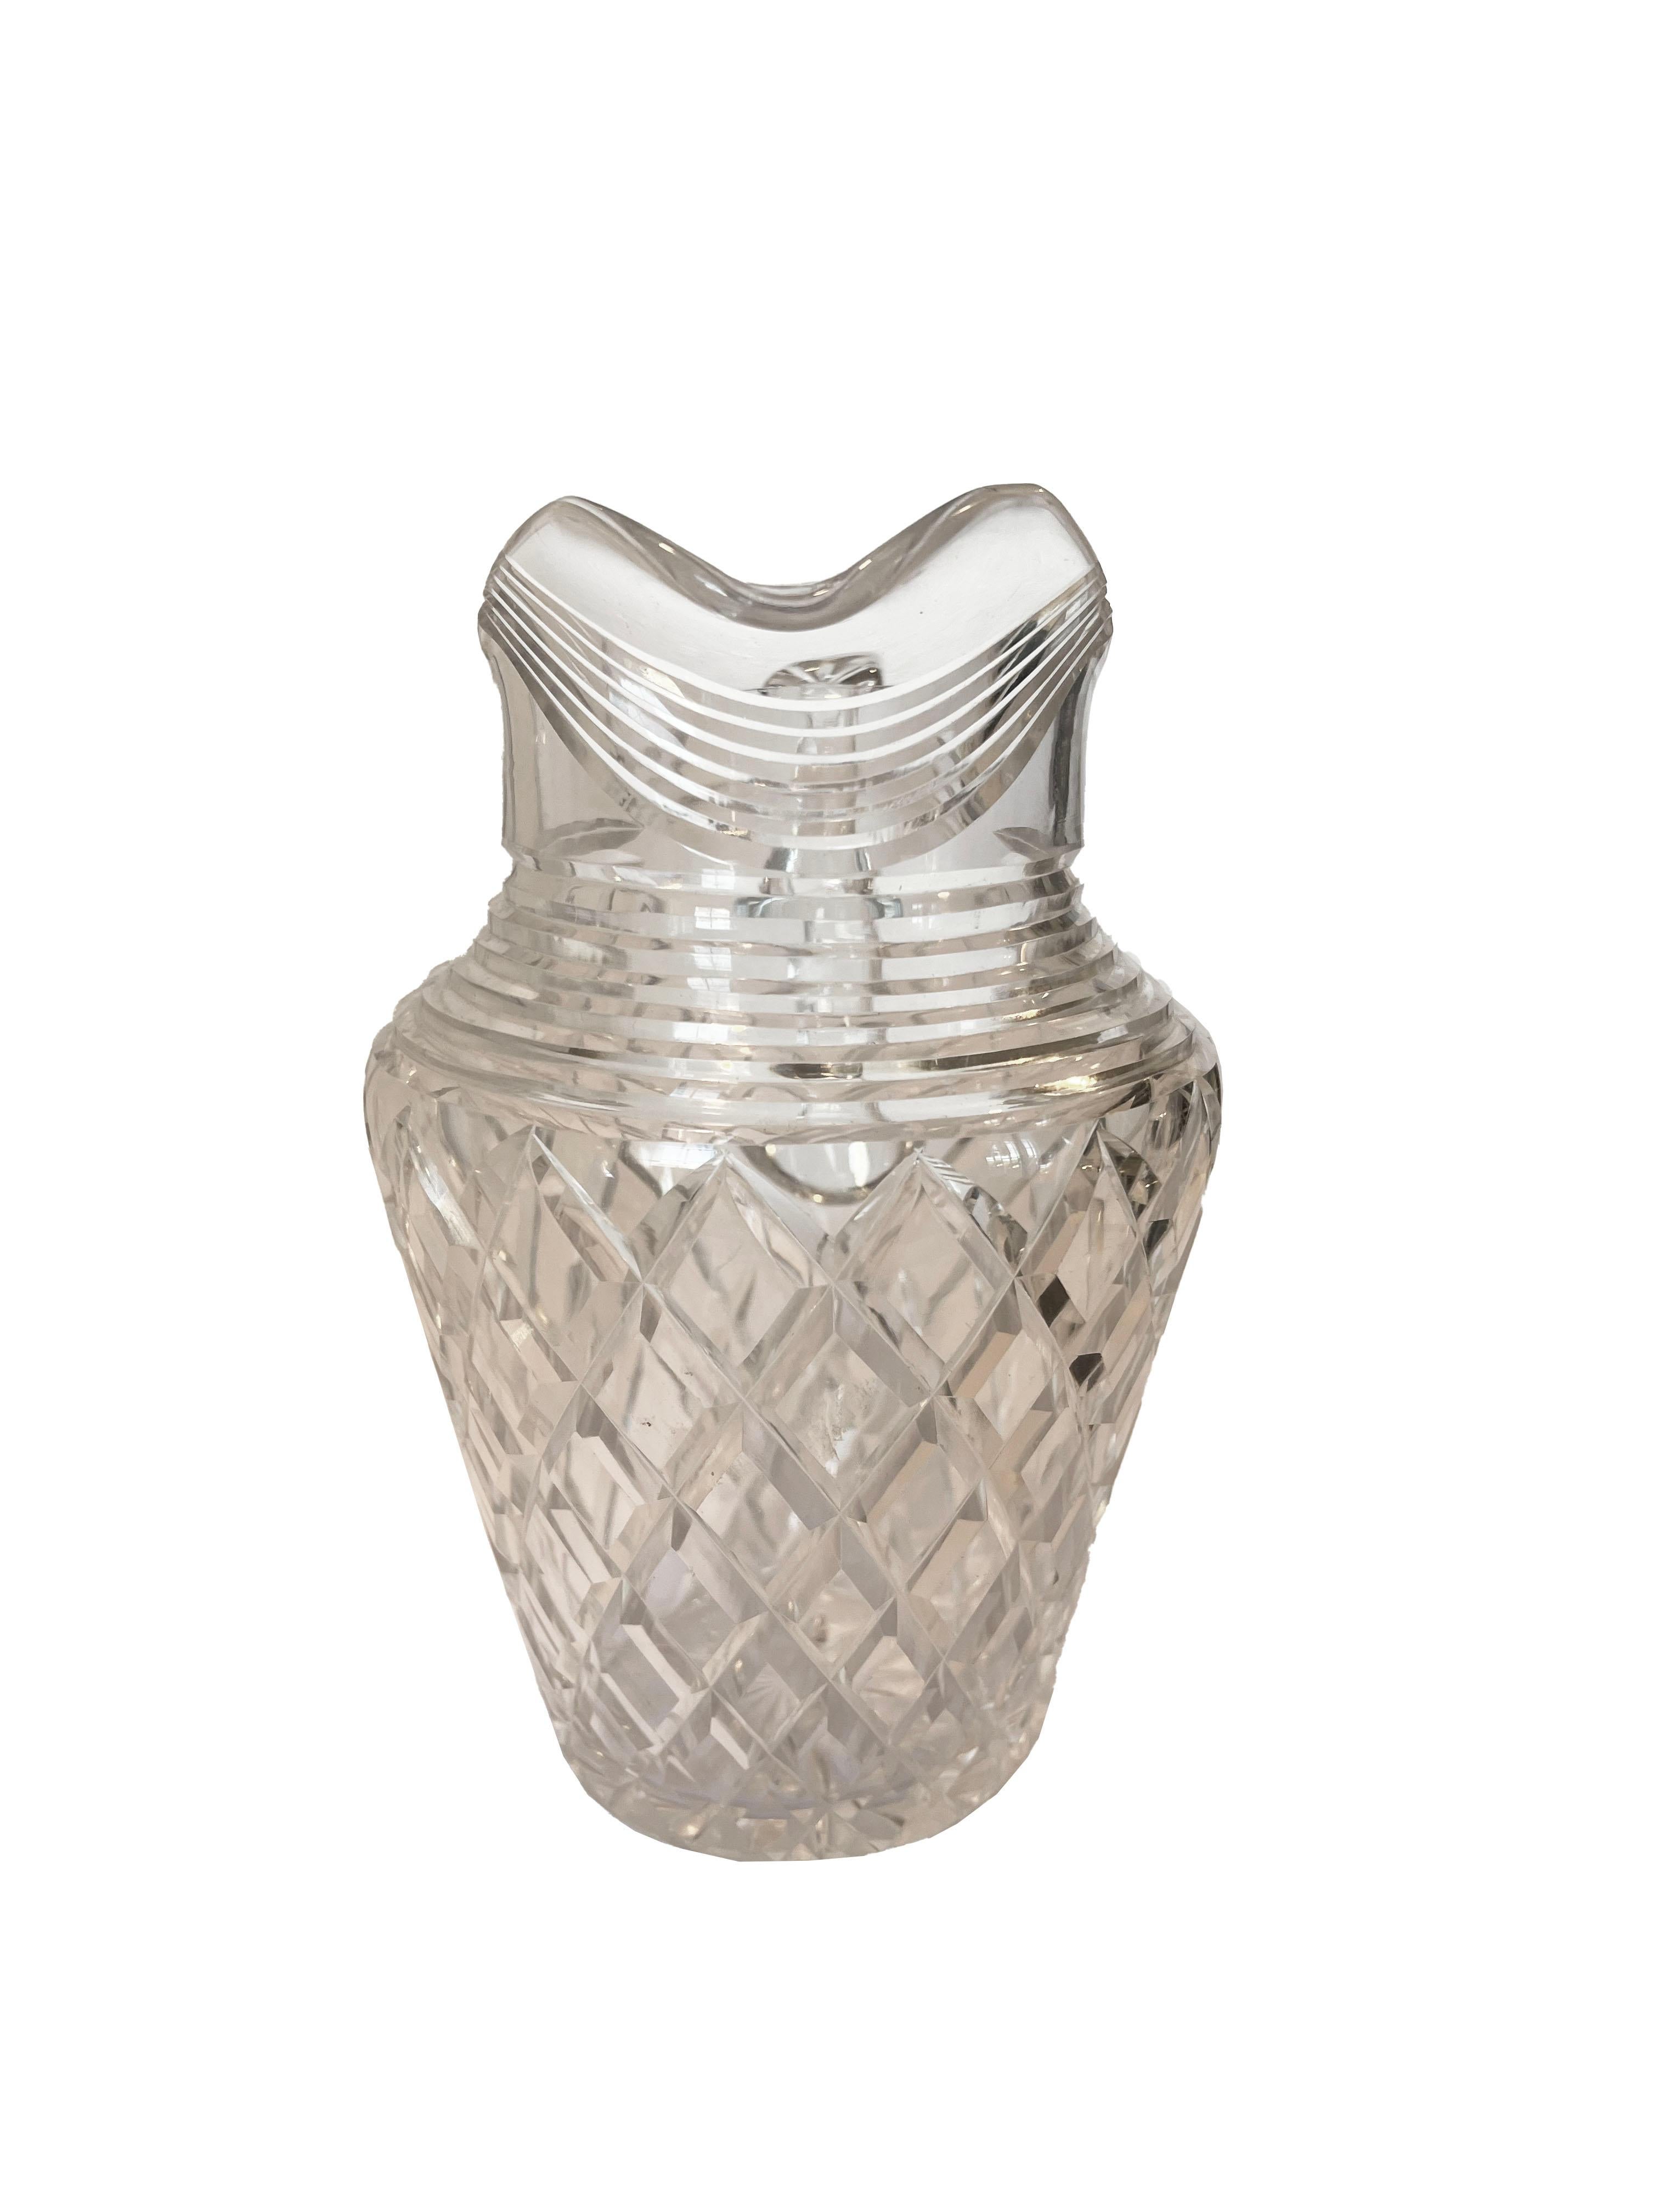 A dazzling crystal faceted pitcher, an exquisite addition to elevate your table setting with a touch of glamour. Though unsigned, this pitcher exudes a timeless elegance, showcasing its craftsmanship through brilliant facets that catch and reflect